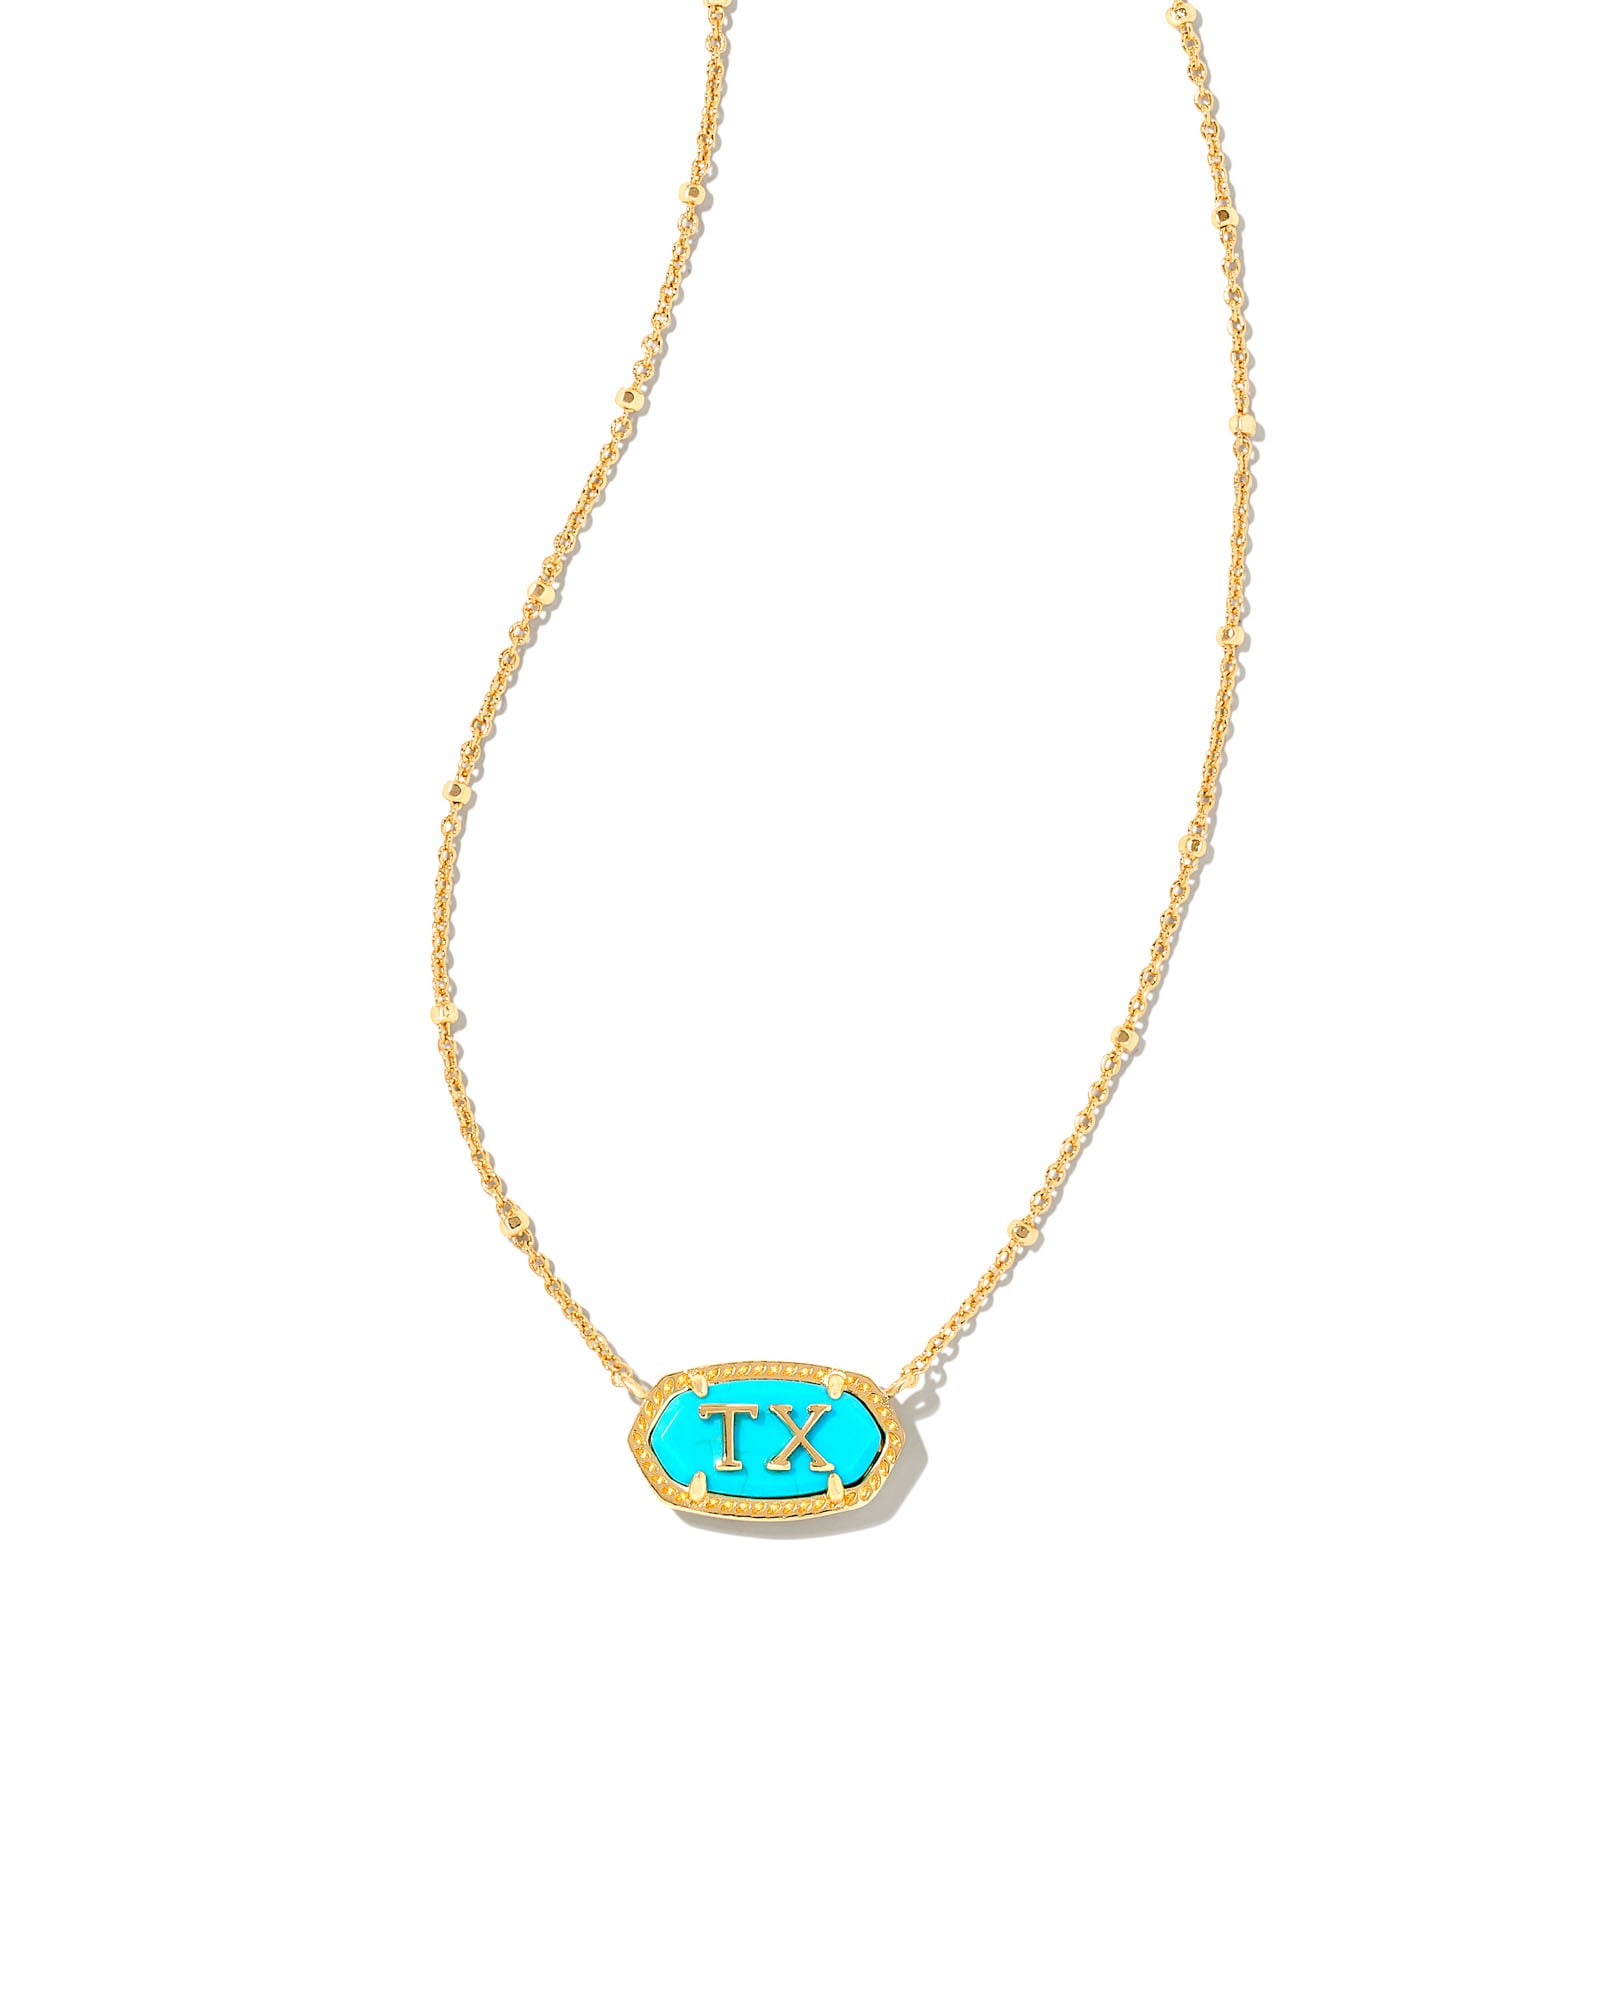 Elisa Gold Texas Necklace in Turquoise Magnesite